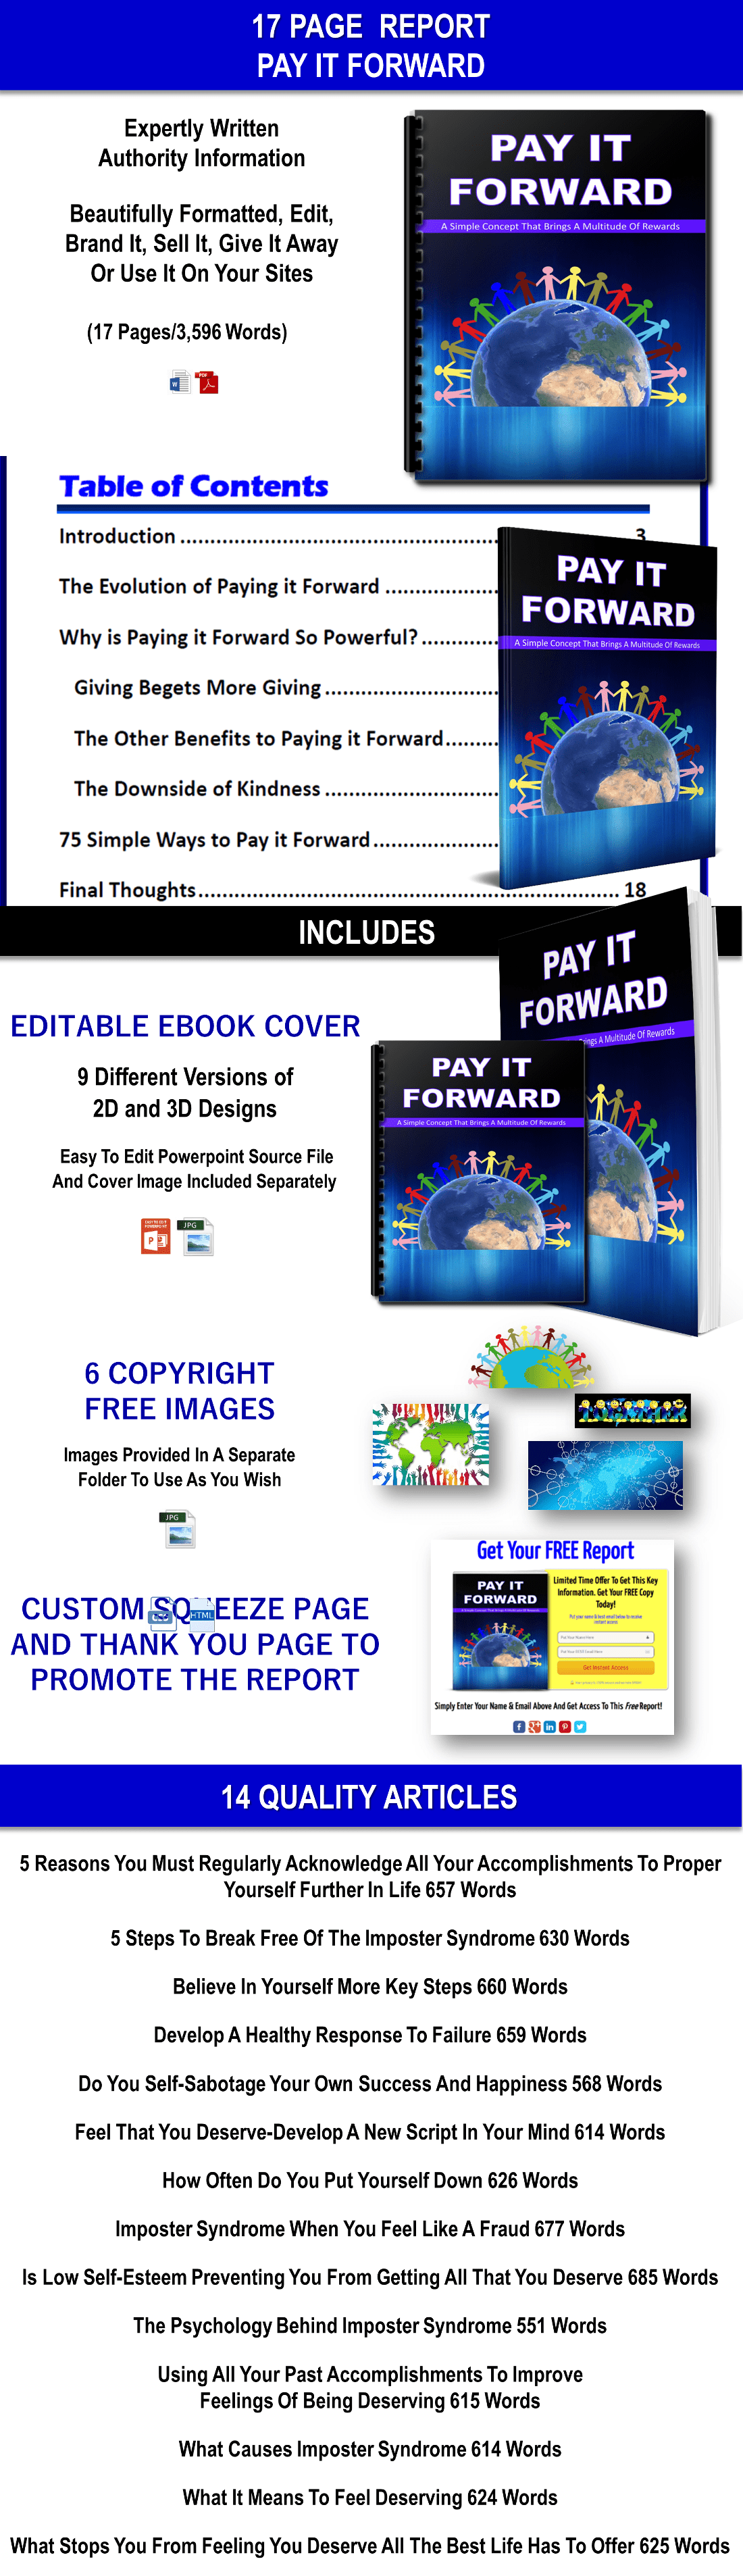 Get Off Autopilot - Rediscover The Joy Missing From Your Life Giant Content Pack with PLR Rights